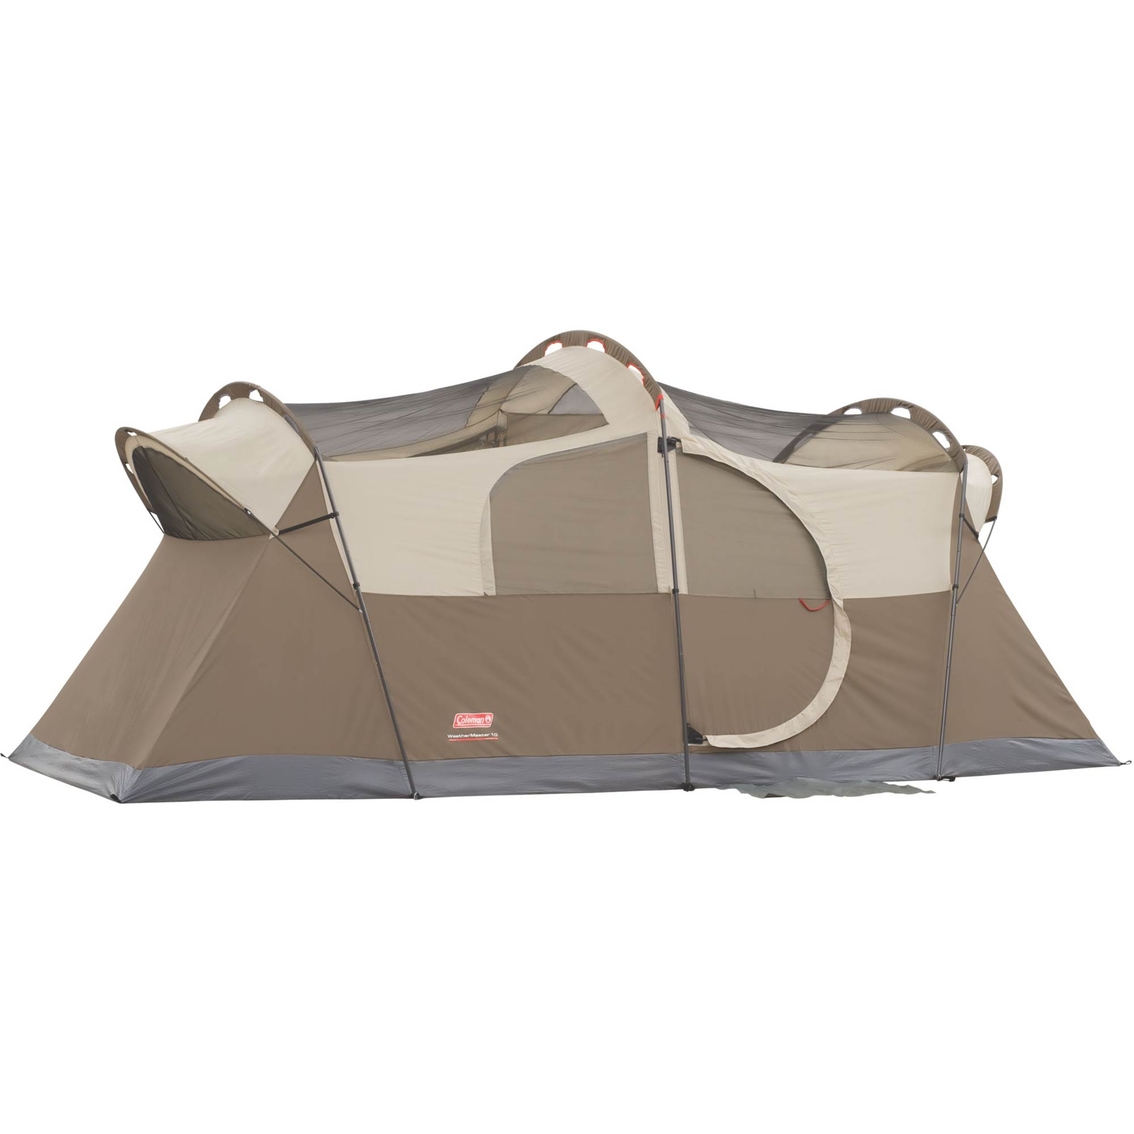 Coleman WeatherMaster 10-Person Tent - Image 2 of 3